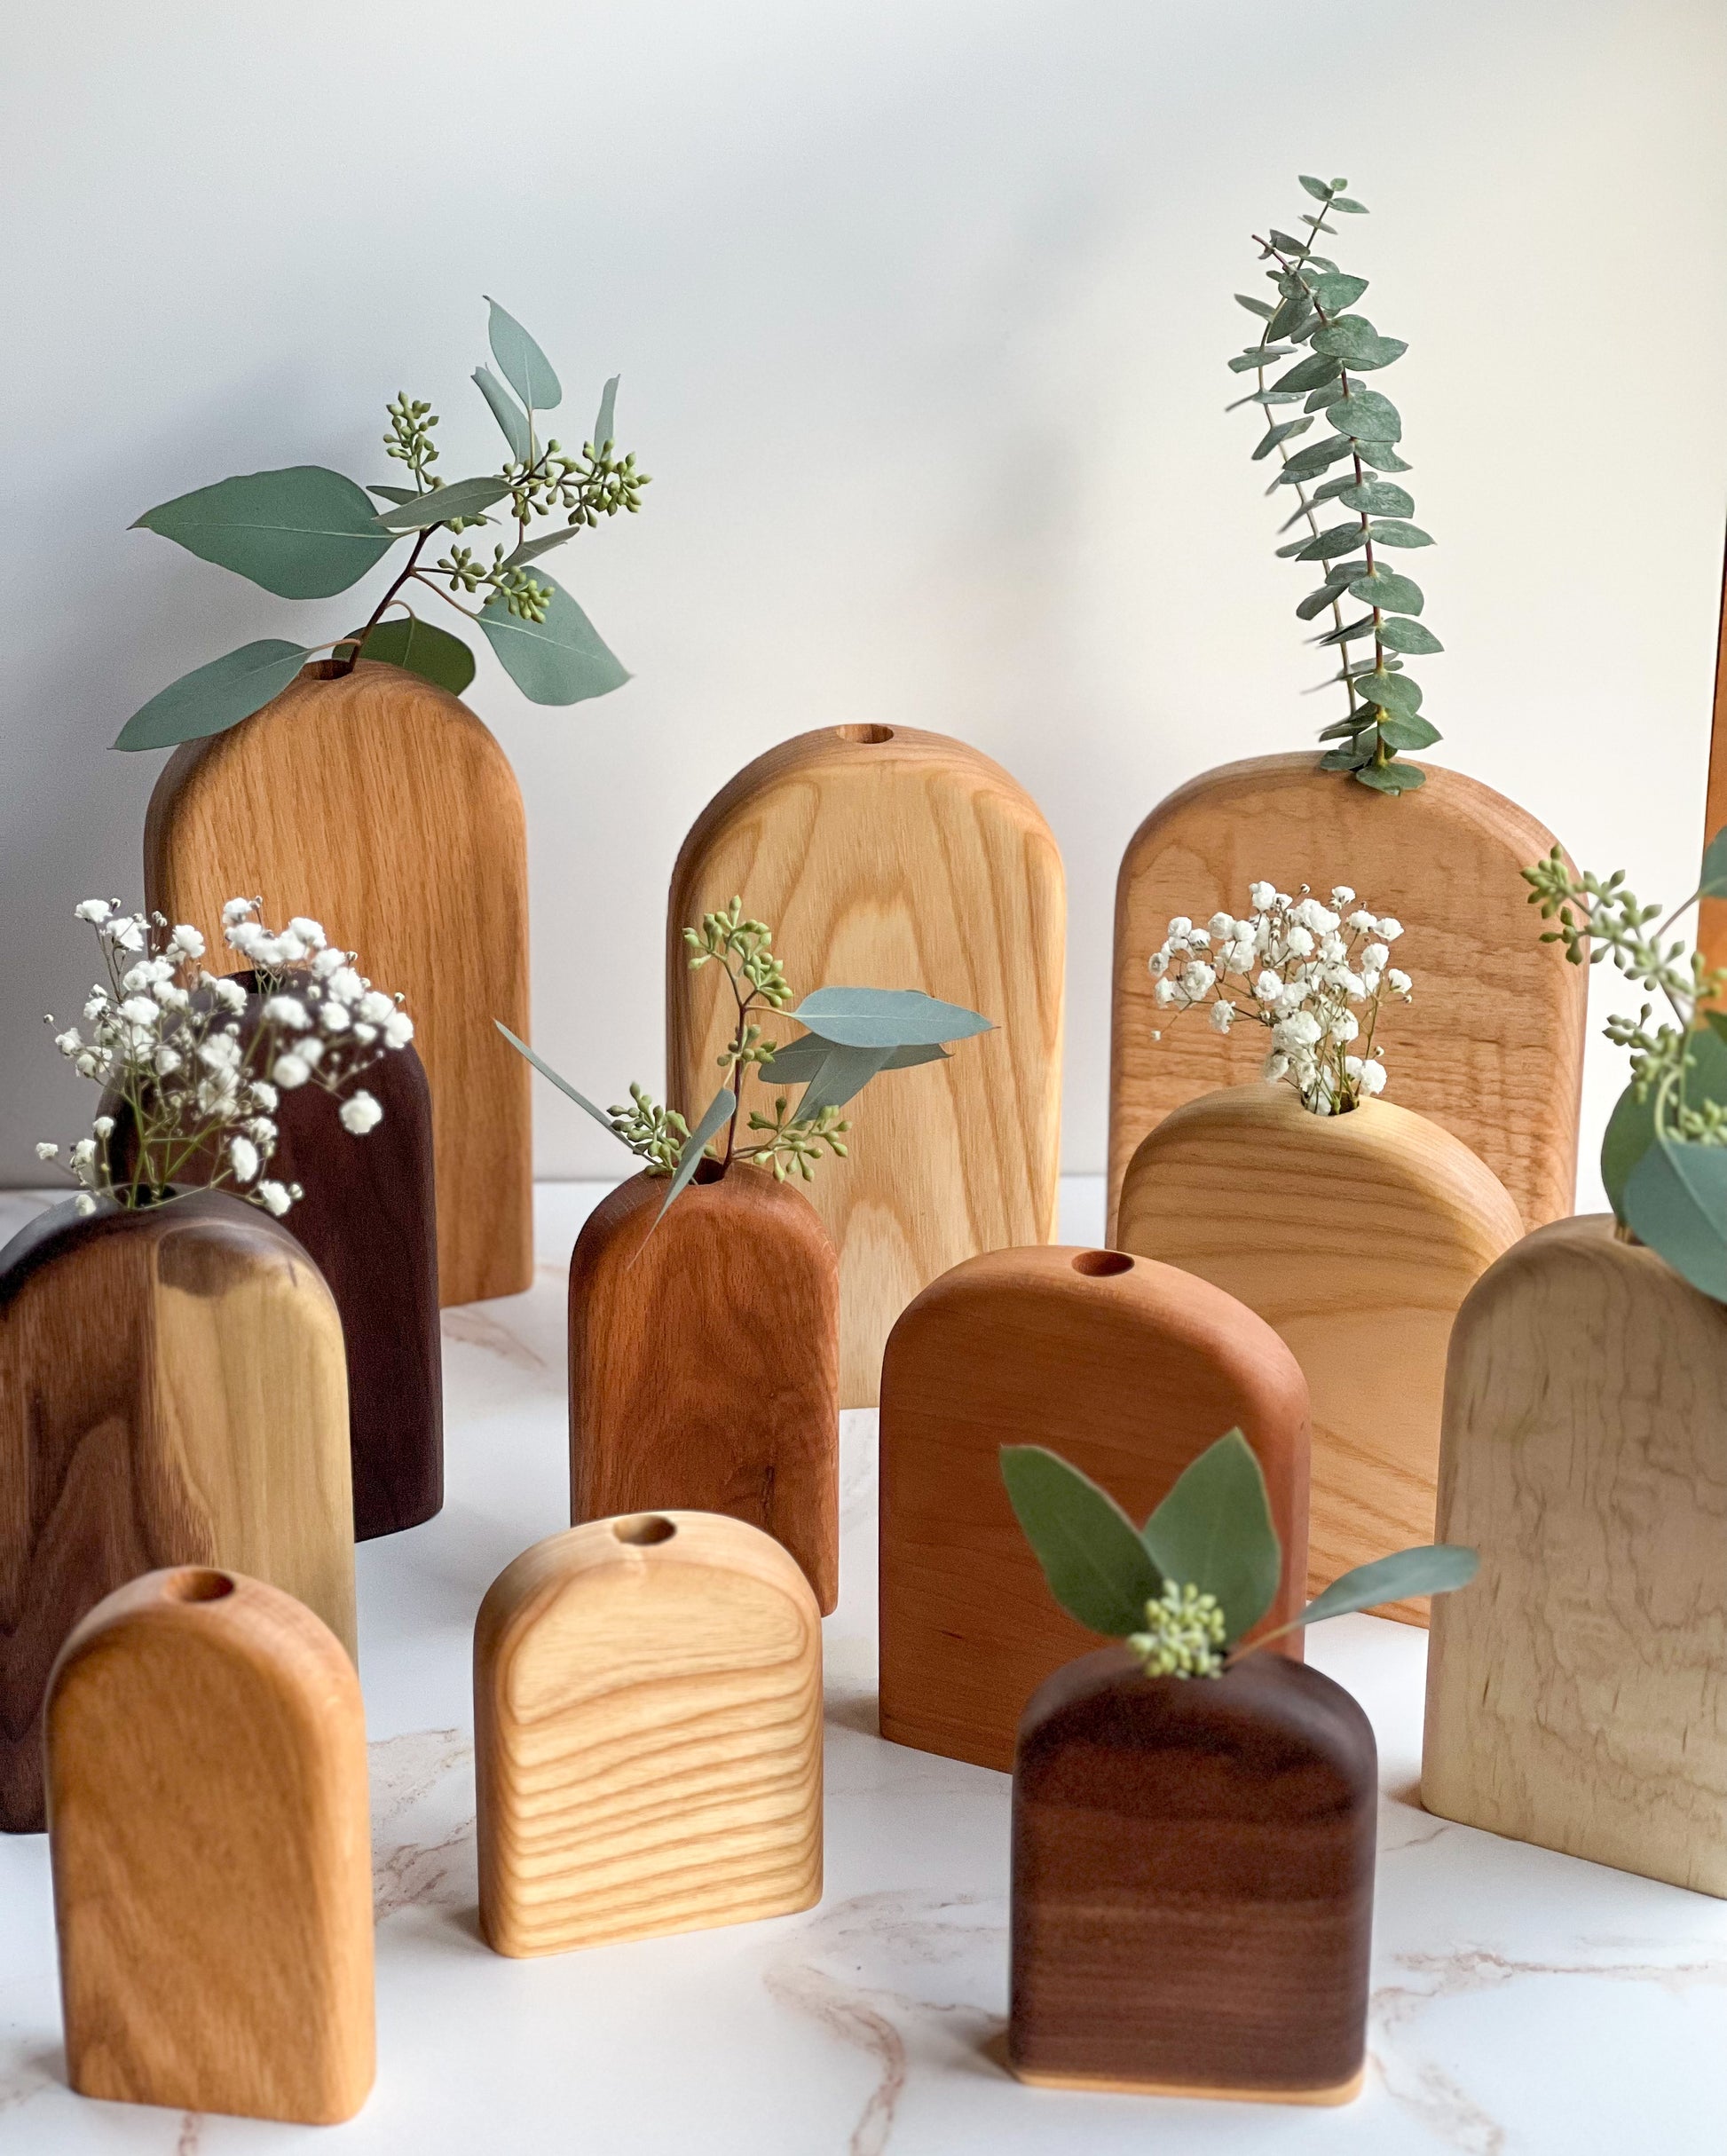 Organic bud/flower vases in all different variations of light and dark wood handmade by Camino Woodshop, making the perfect decor for your home or gift for friends and family